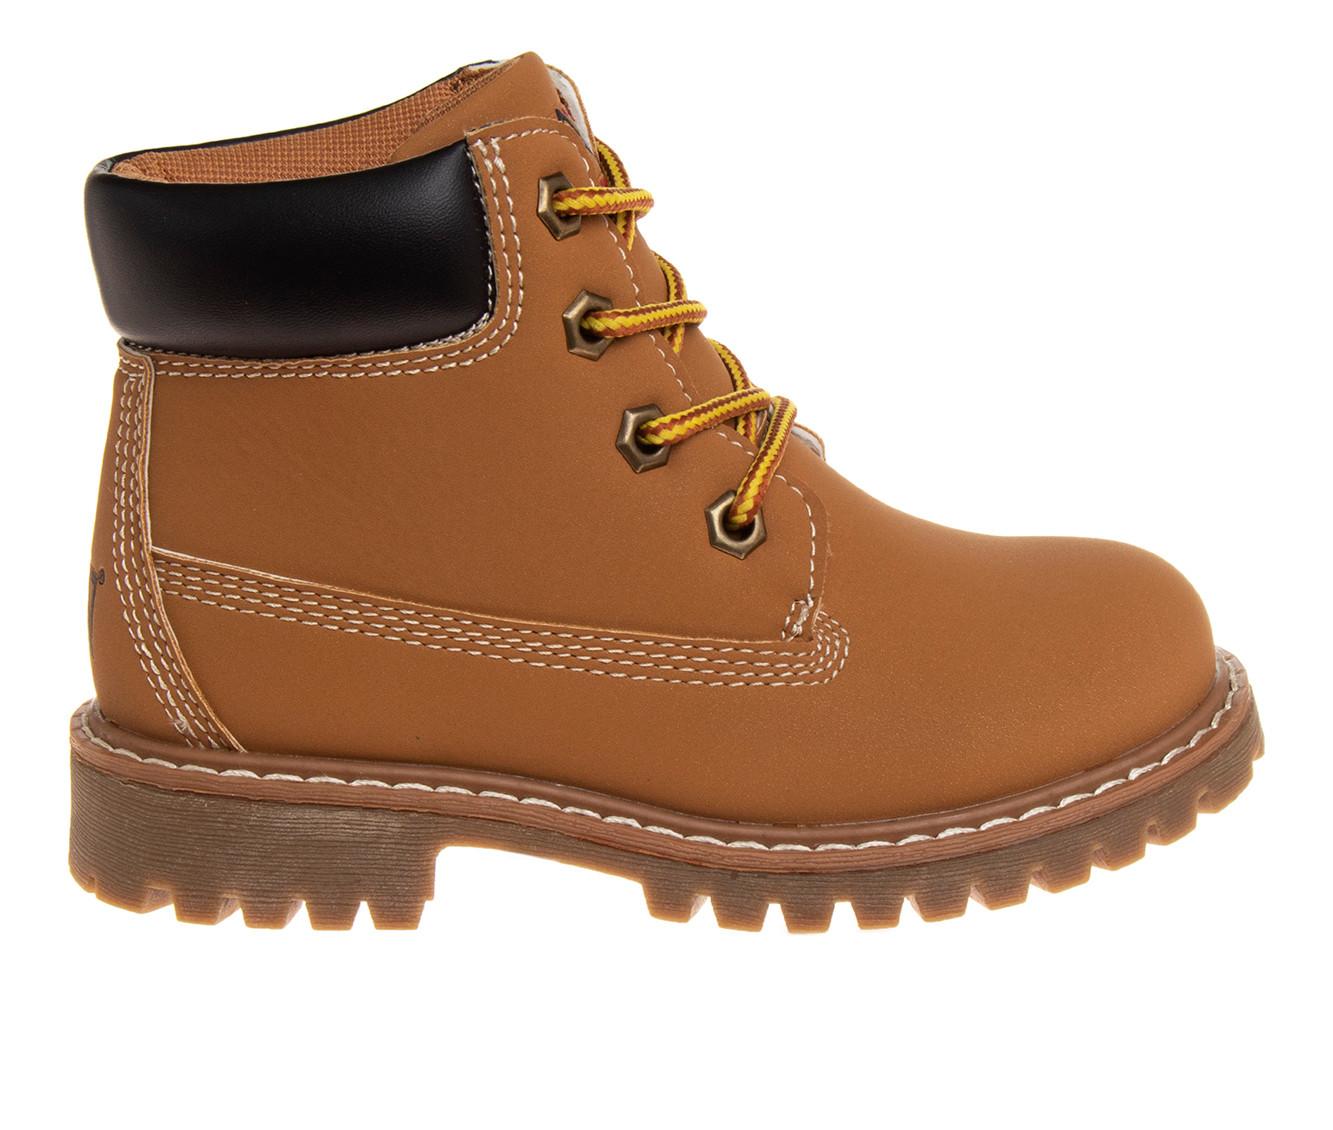 Boys' Avalanche Toddler Fly High Boots